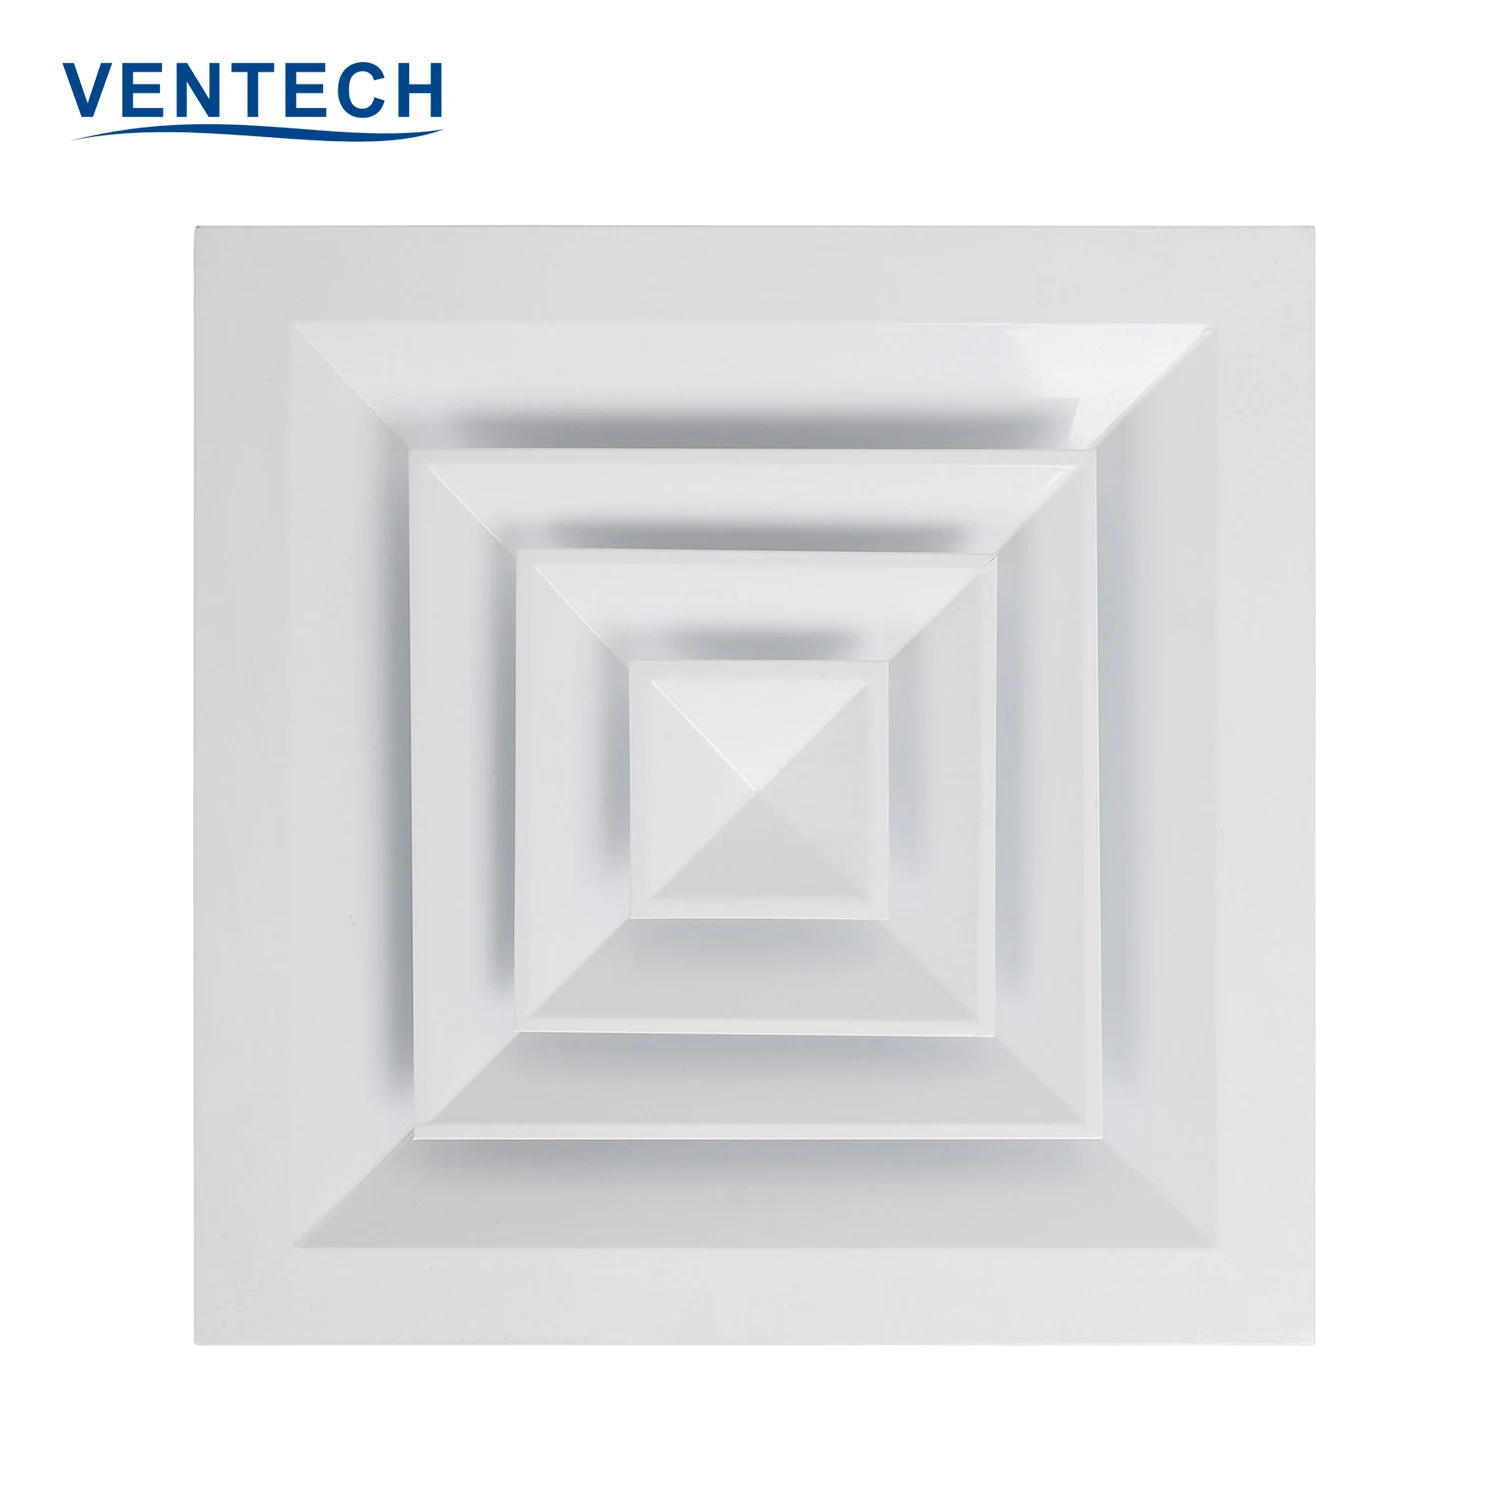 China Factory Ventech Free Sample Air Conditioning Aluminum Square Ceiling Air Diffuser